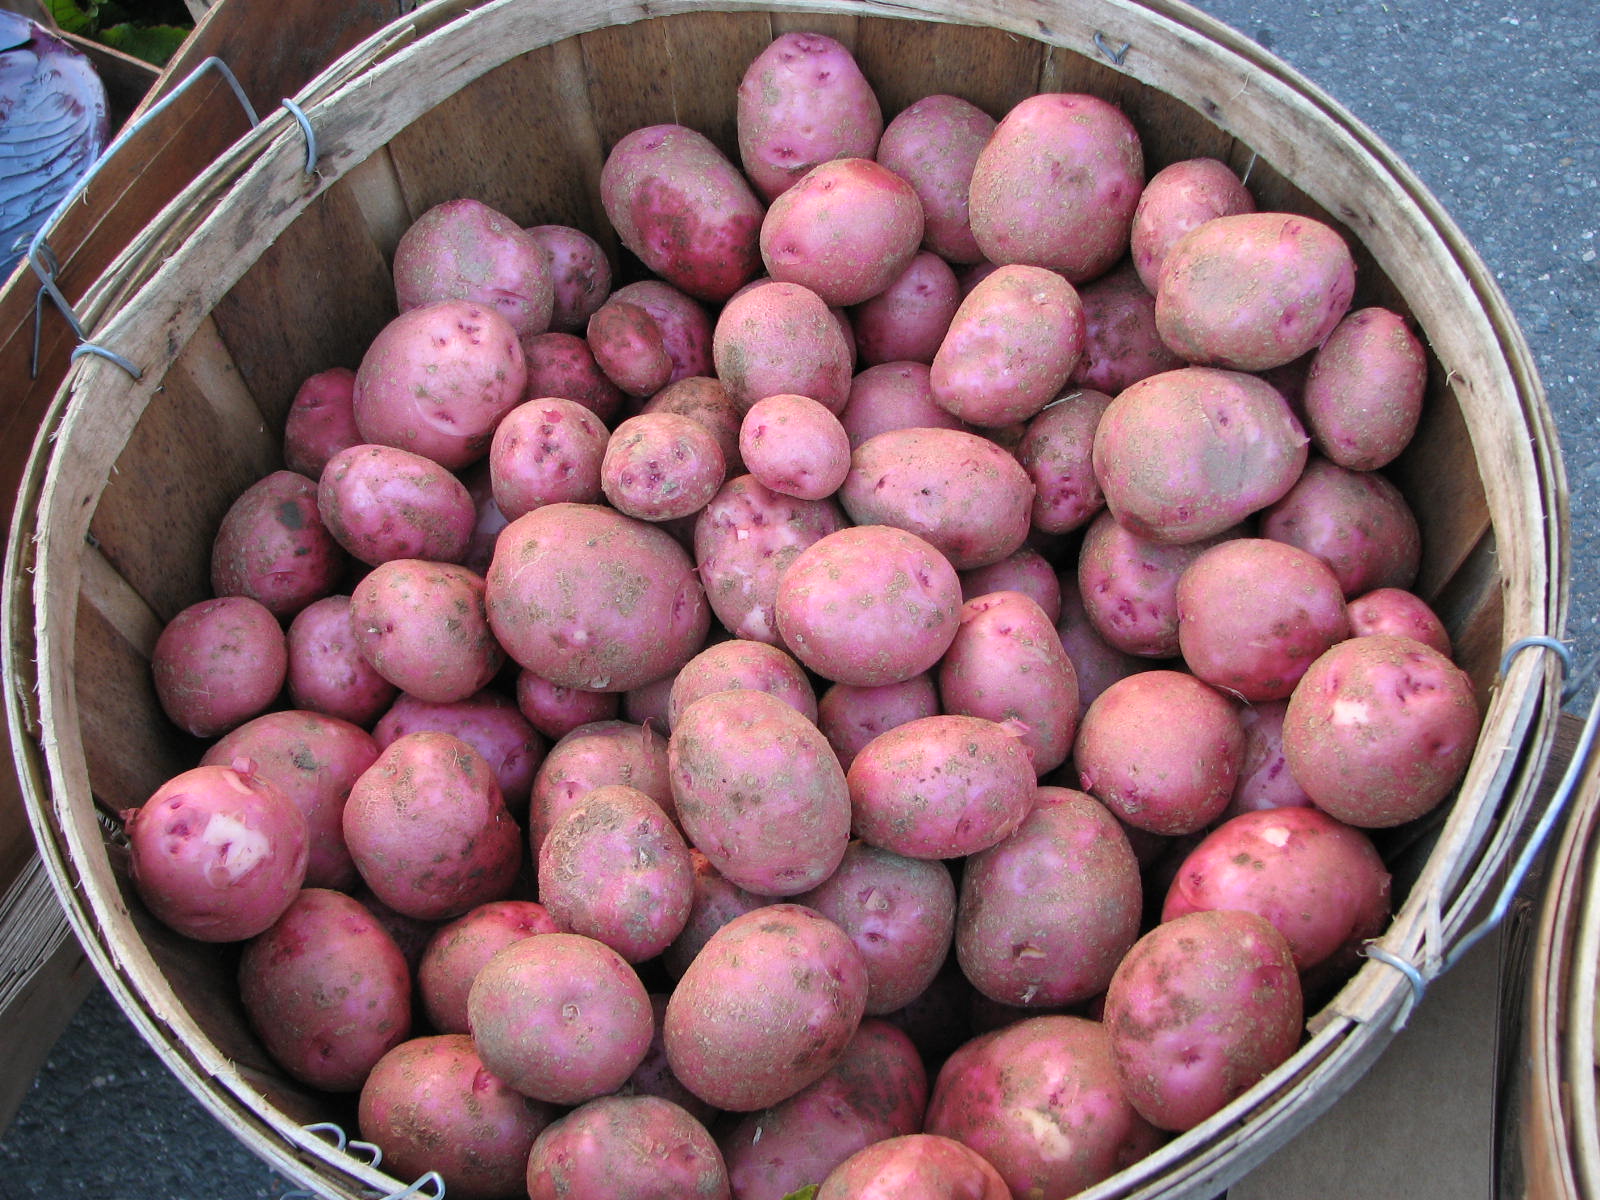 http://sweetwater-organic.org/wp-content/uploads/2014/04/Red-potatoes-3.jpg